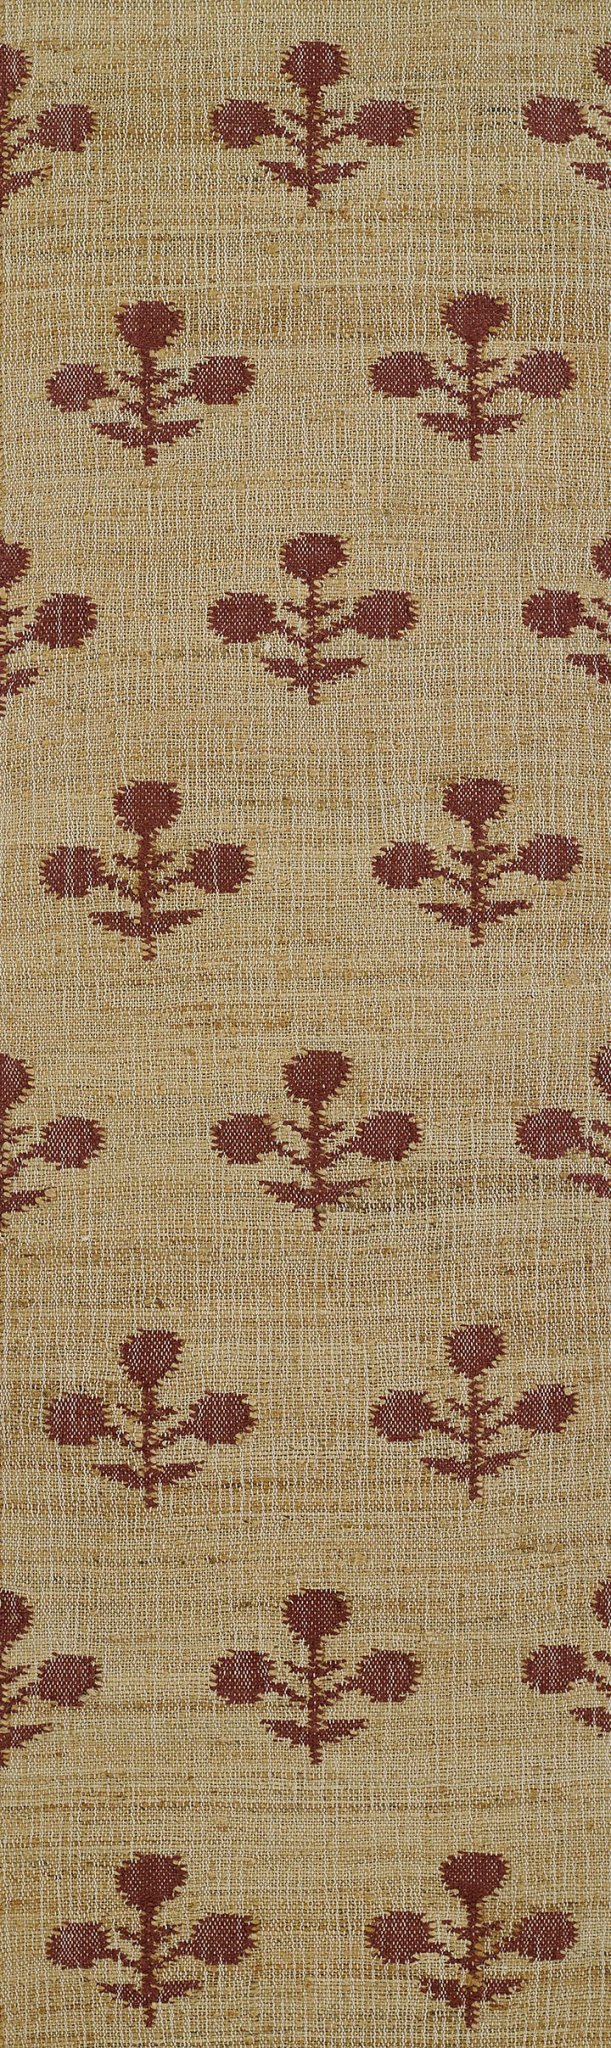 Erin Gates by Momeni Orchard Bloom Rust Hand Woven Wool and Jute Area Rug - BlueJay Avenue